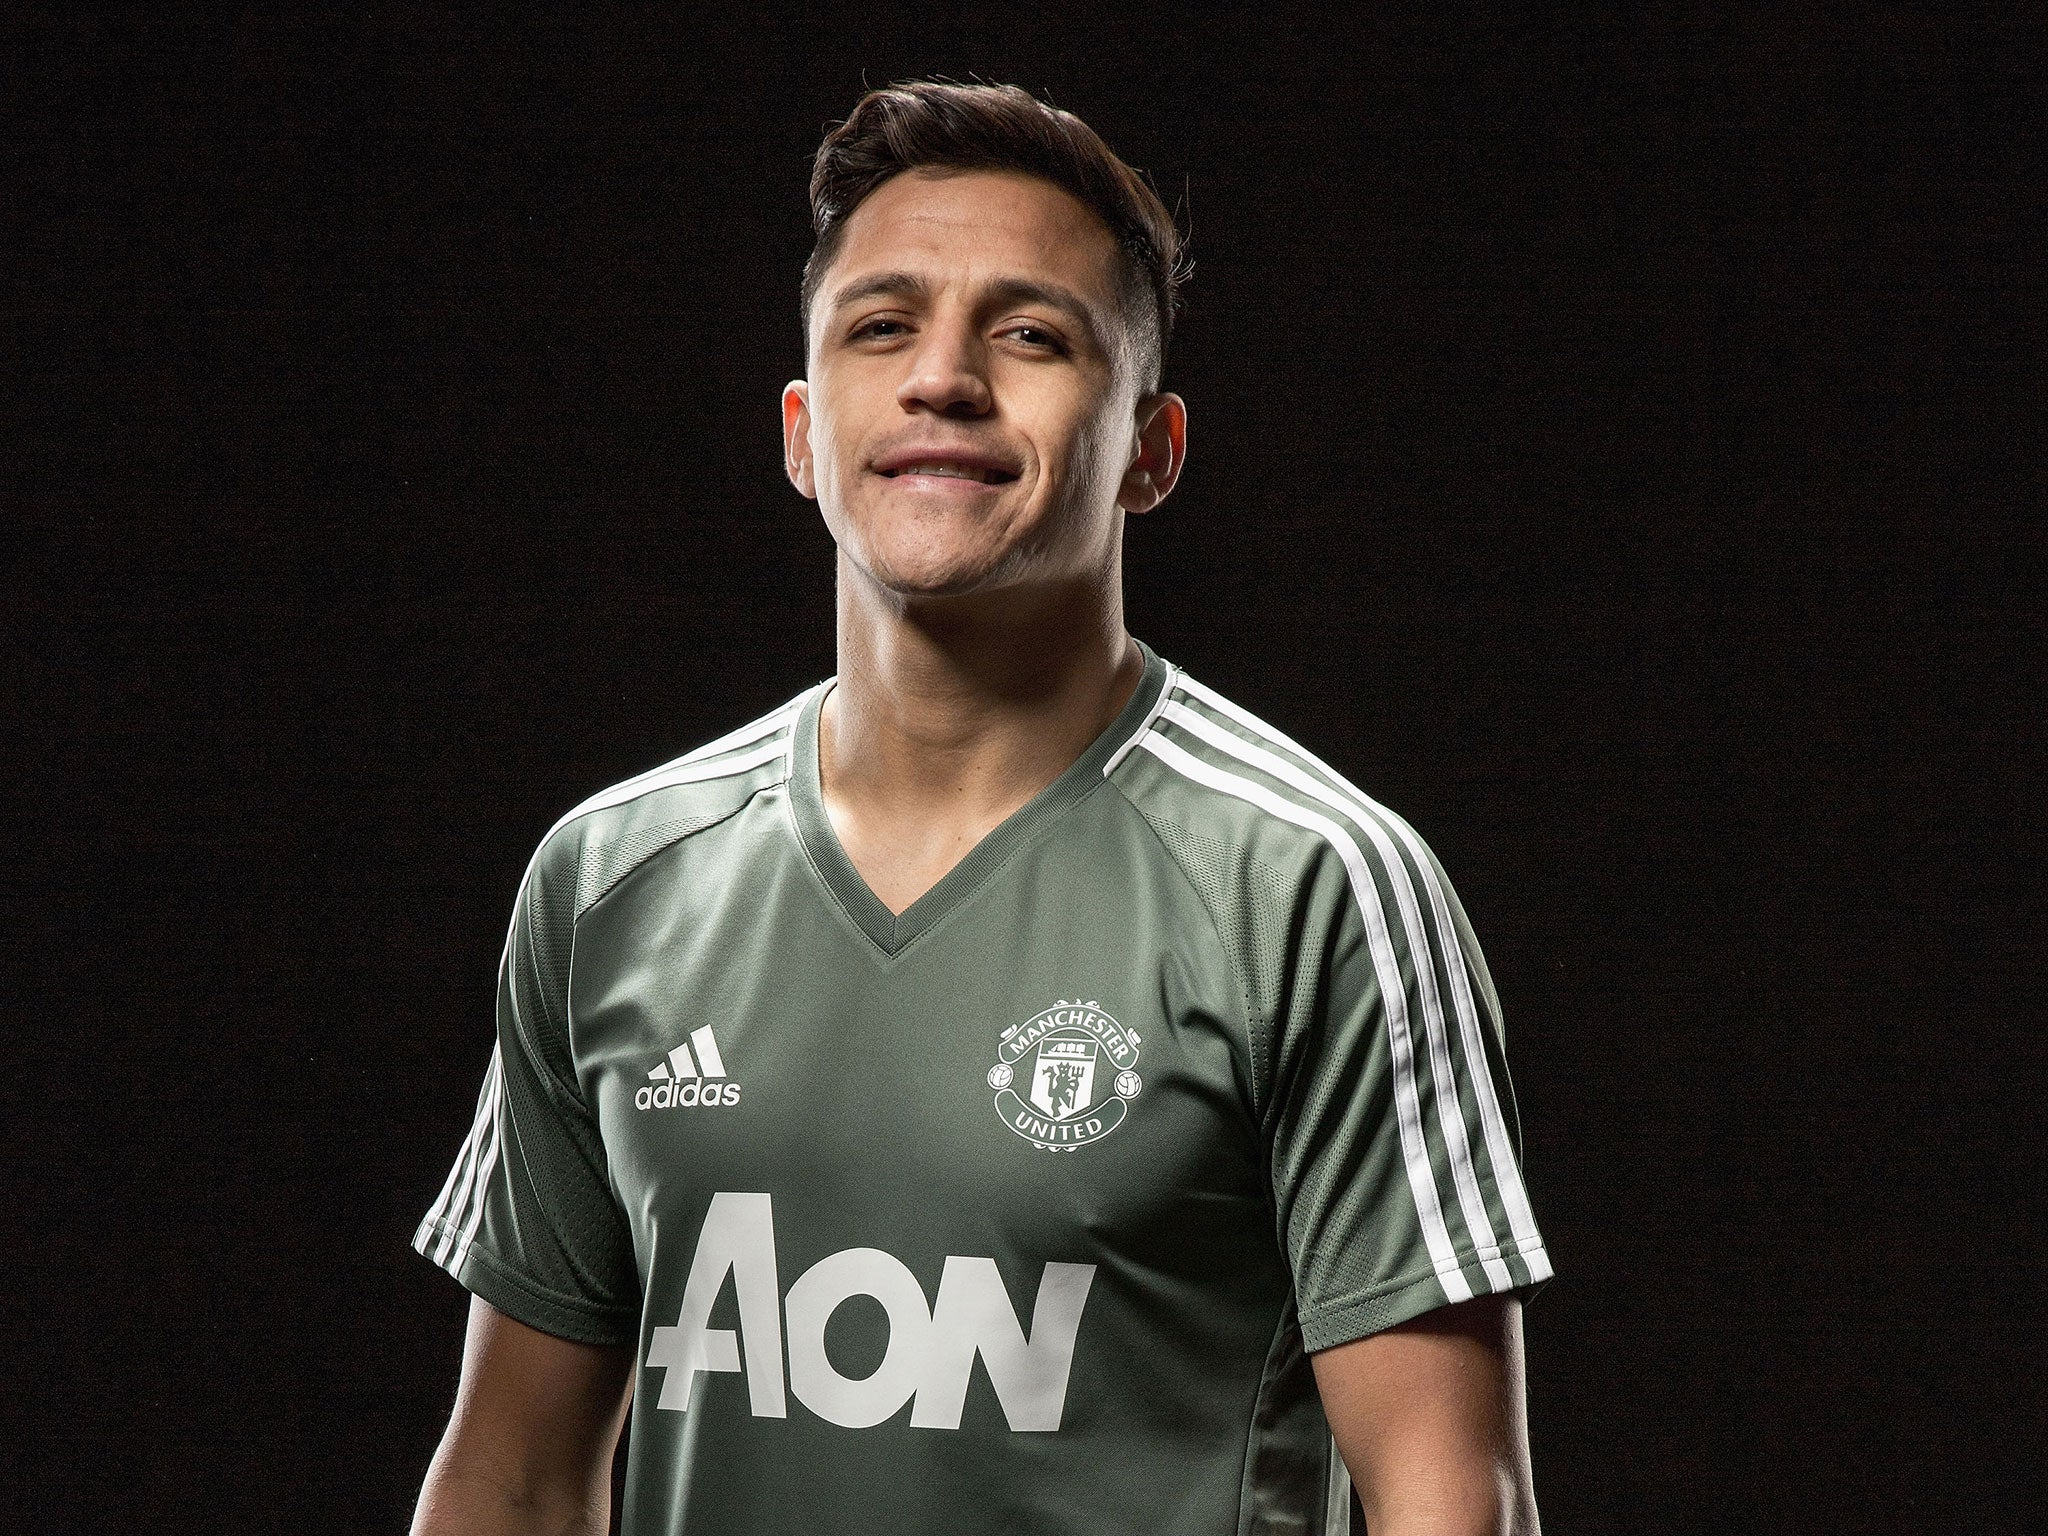 Alexis Sanchez was confirmed as a Manchester United player on Monday